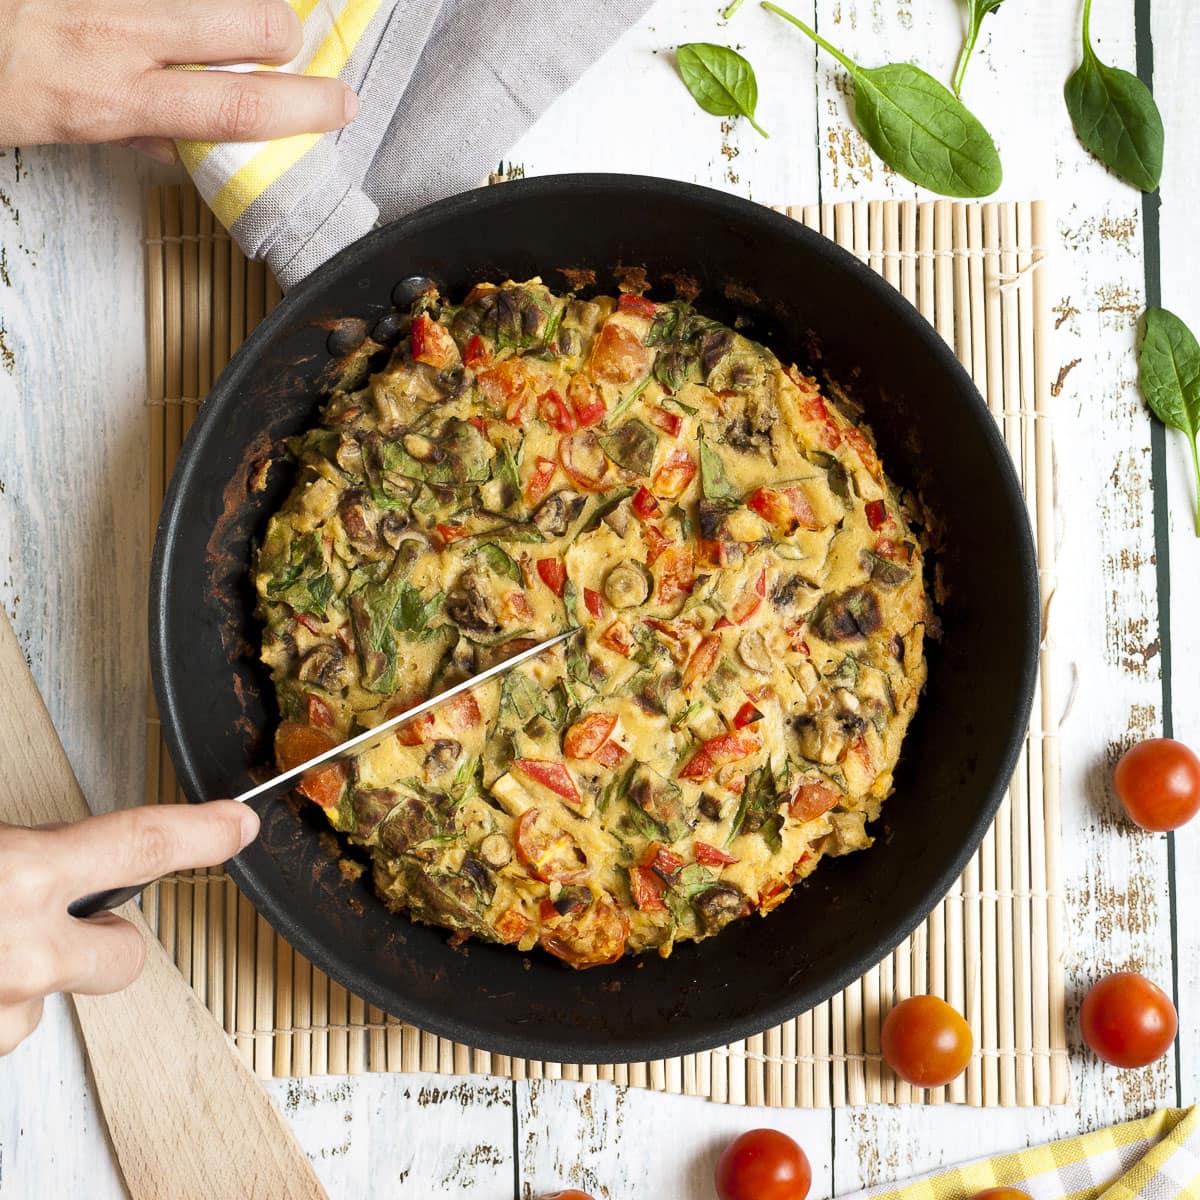 <p>This frittata is a healthy and satisfying breakfast option that is loaded with vegetables and made with a simple 3-ingredient chickpea flour base. It’s perfect for meal prep and can be enjoyed hot or cold.</p><p><strong>Recipe: <a href="https://mypureplants.com/vegan-frittata/">frittata</a></strong></p>